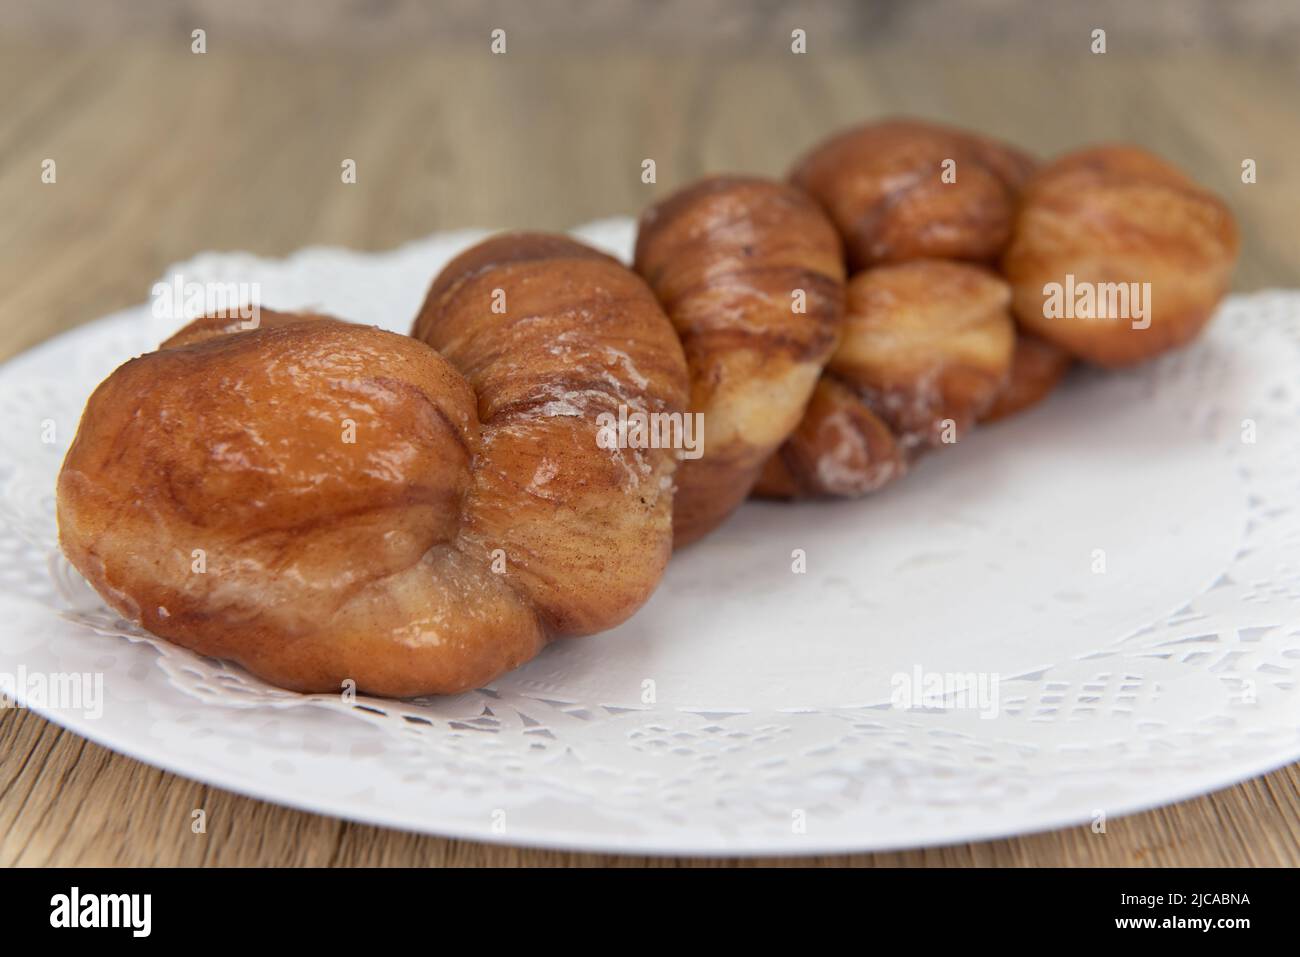 Tempting fresh from the oven cinnamon twist donut from the bakery served on a plate. Stock Photo